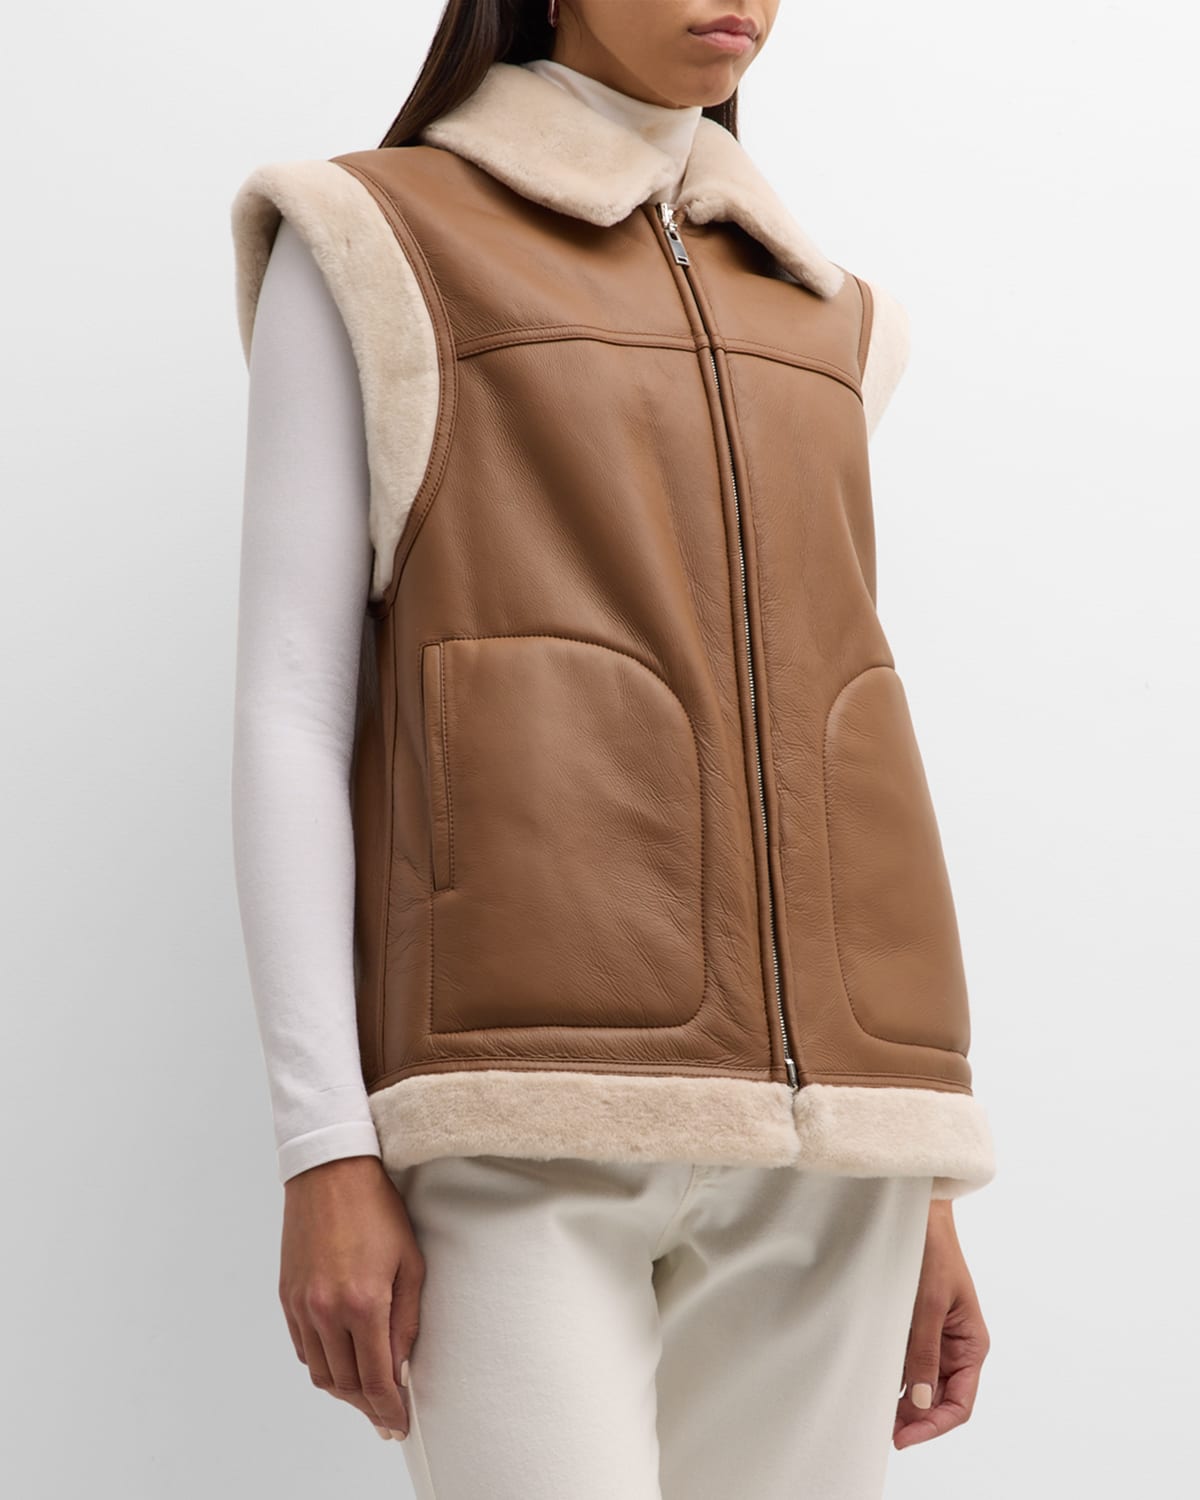 ANNE VEST Tiffany Leather Vest with Shearling Lining